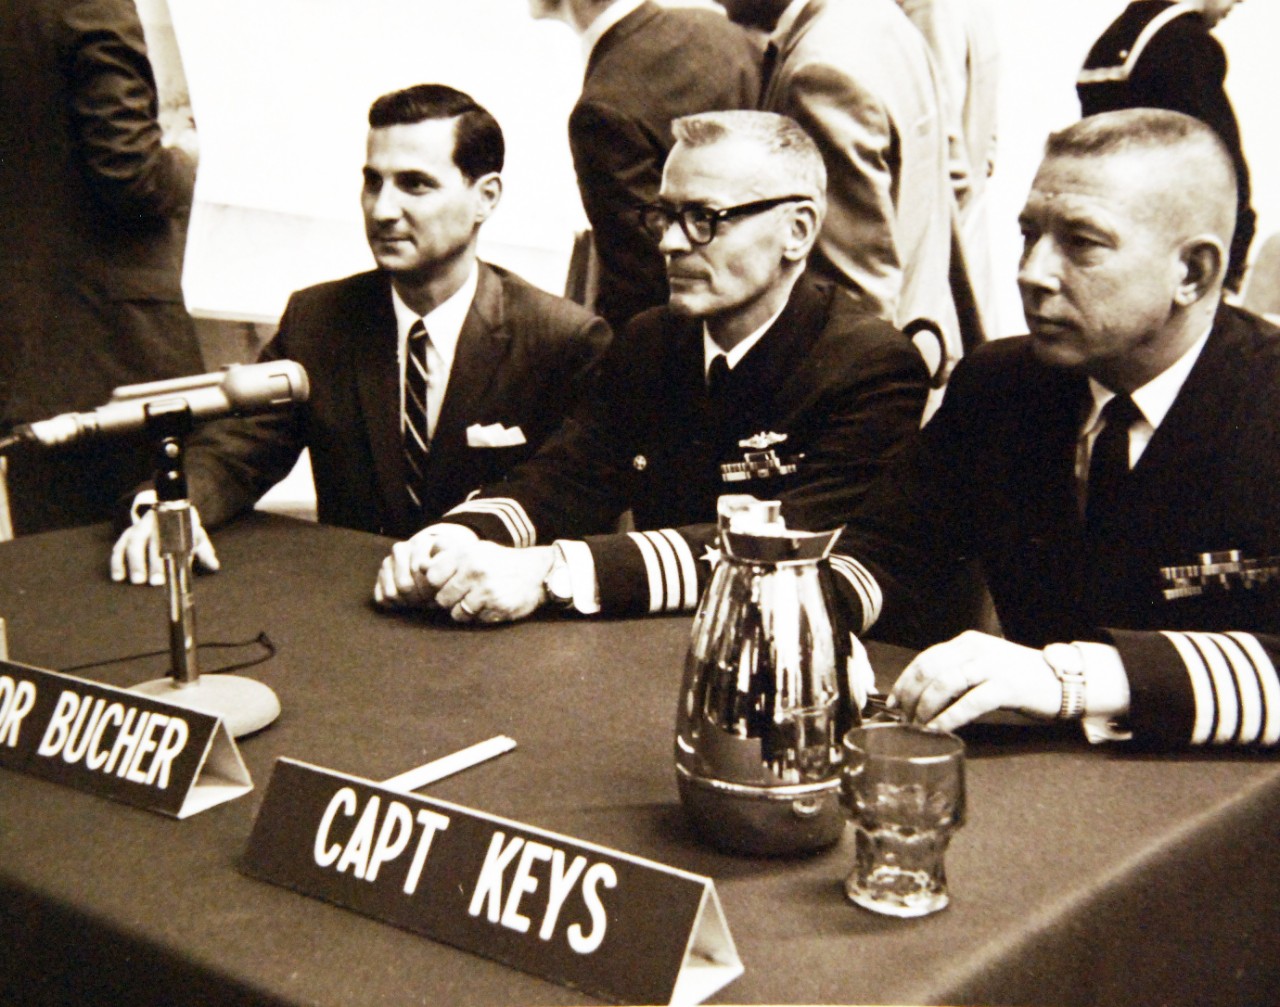 428-GX-USN-1140173:   San Diego, California, January 1969.   From left, Mr. E. Miles Harvey, Civilian Counsel; Commander Lloyd M. Bucher, Commanding Officer of USS Pueblo (AGER-2) and Captain James E. Keys, Military Counsel are seated during the opening session of the U.S. Navy Court of Inquiry into the Pueblo capture.  The inquiry is underway at the Naval Amphibious Base, Coronado.    Photographed by Wayne W. Massie.   Official U.S. Navy Photograph, now in the collections of the National Archives.  (2017/05/23).  Photographed from reference card.  